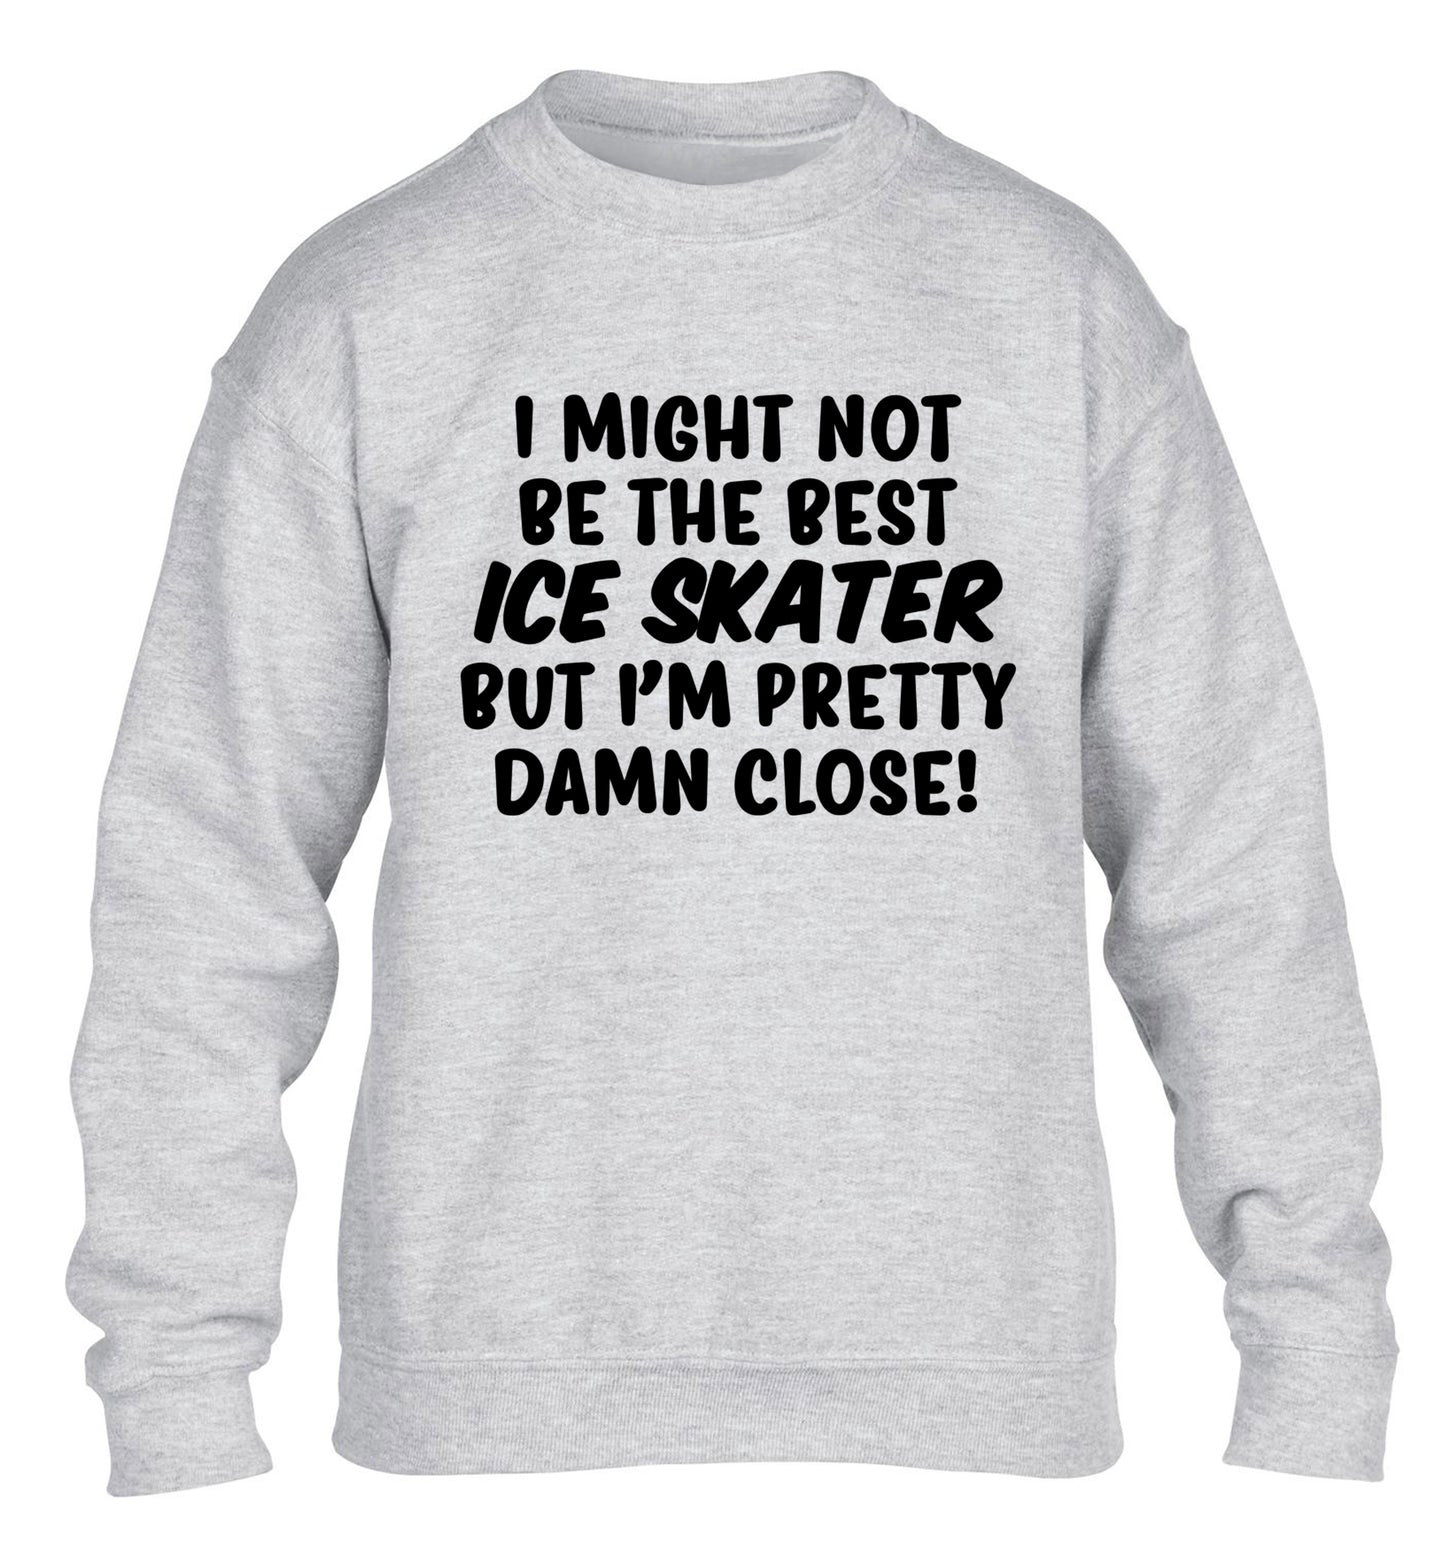 I might not be the best ice skater but I'm pretty damn close! children's grey sweater 12-14 Years